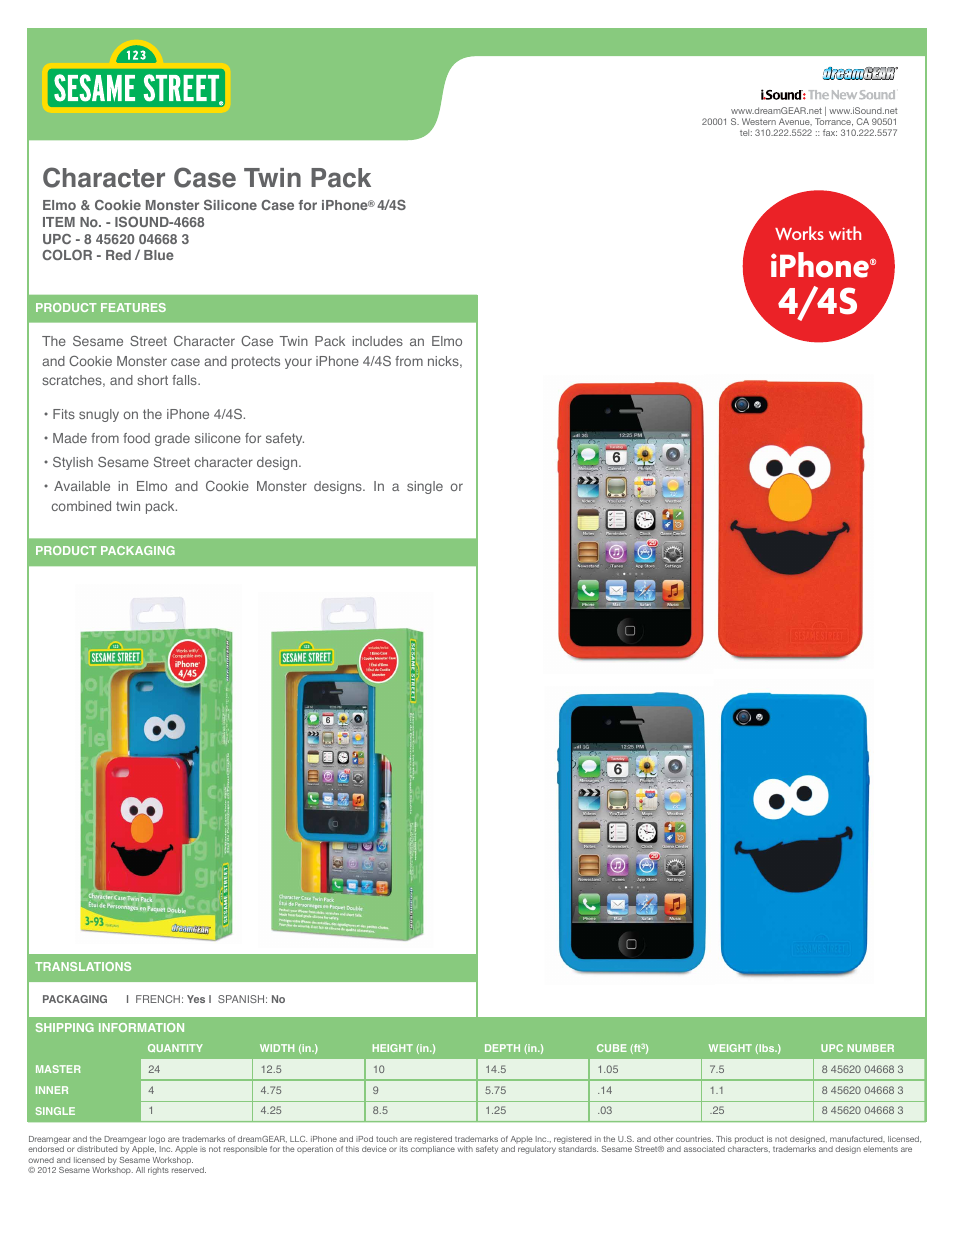 Character Case Twin Pack for iPhone 4 and 4S - Sell Sheet